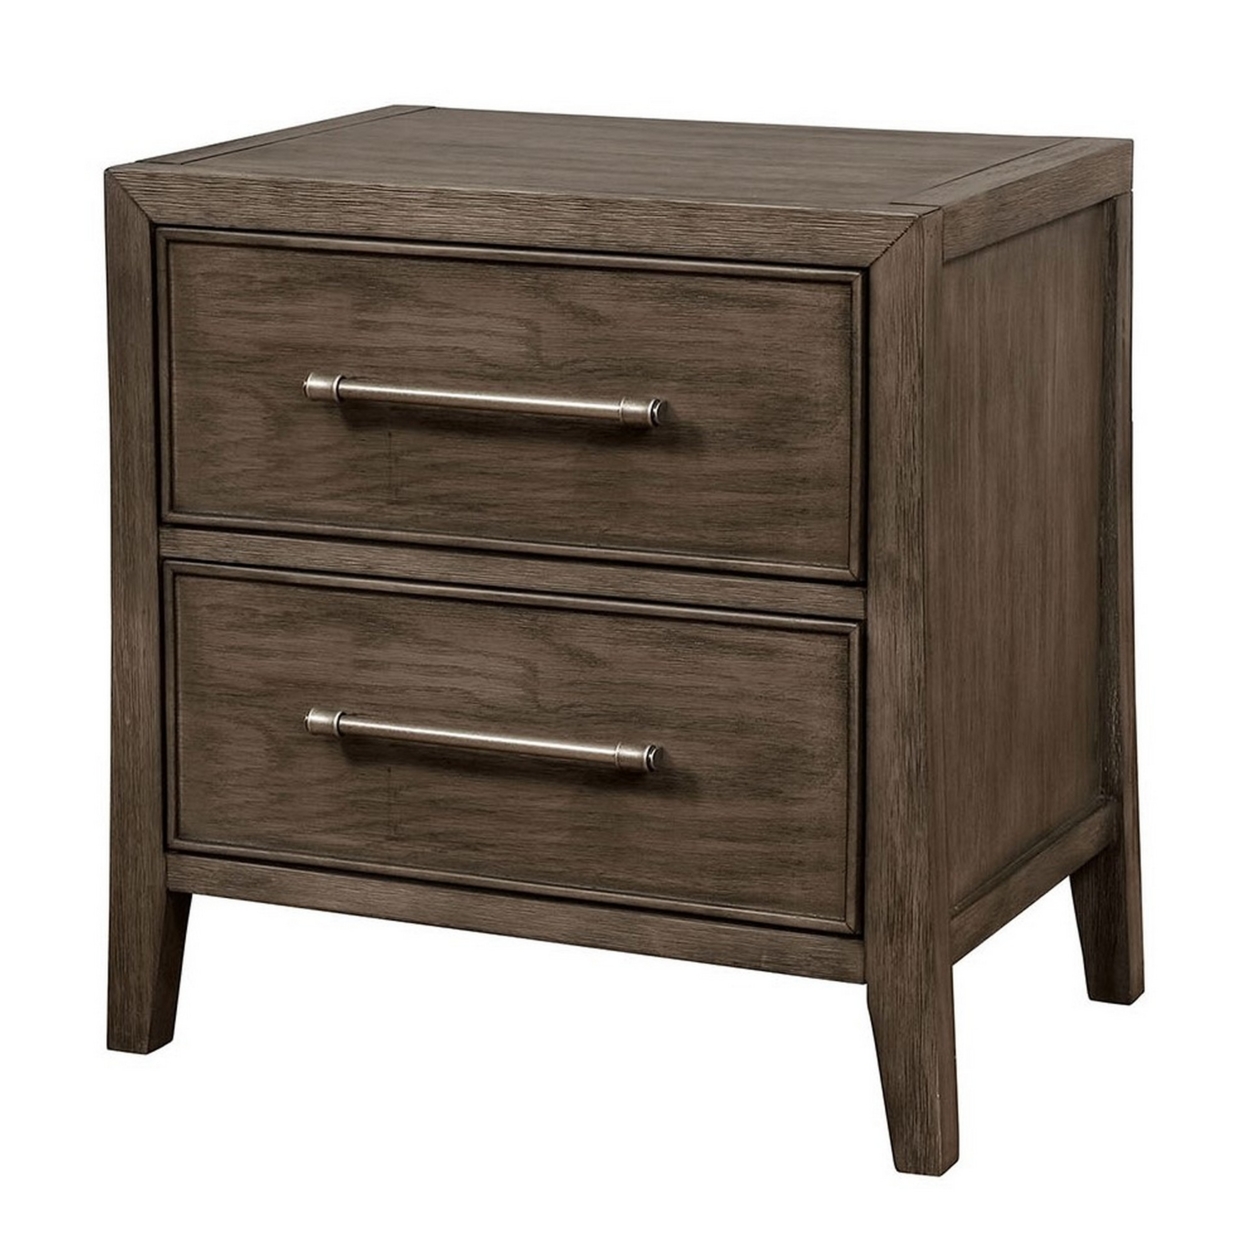 2 Drawer Wooden Nightstand With Metal Bar Pulls And USB Port, Brown- Saltoro Sherpi